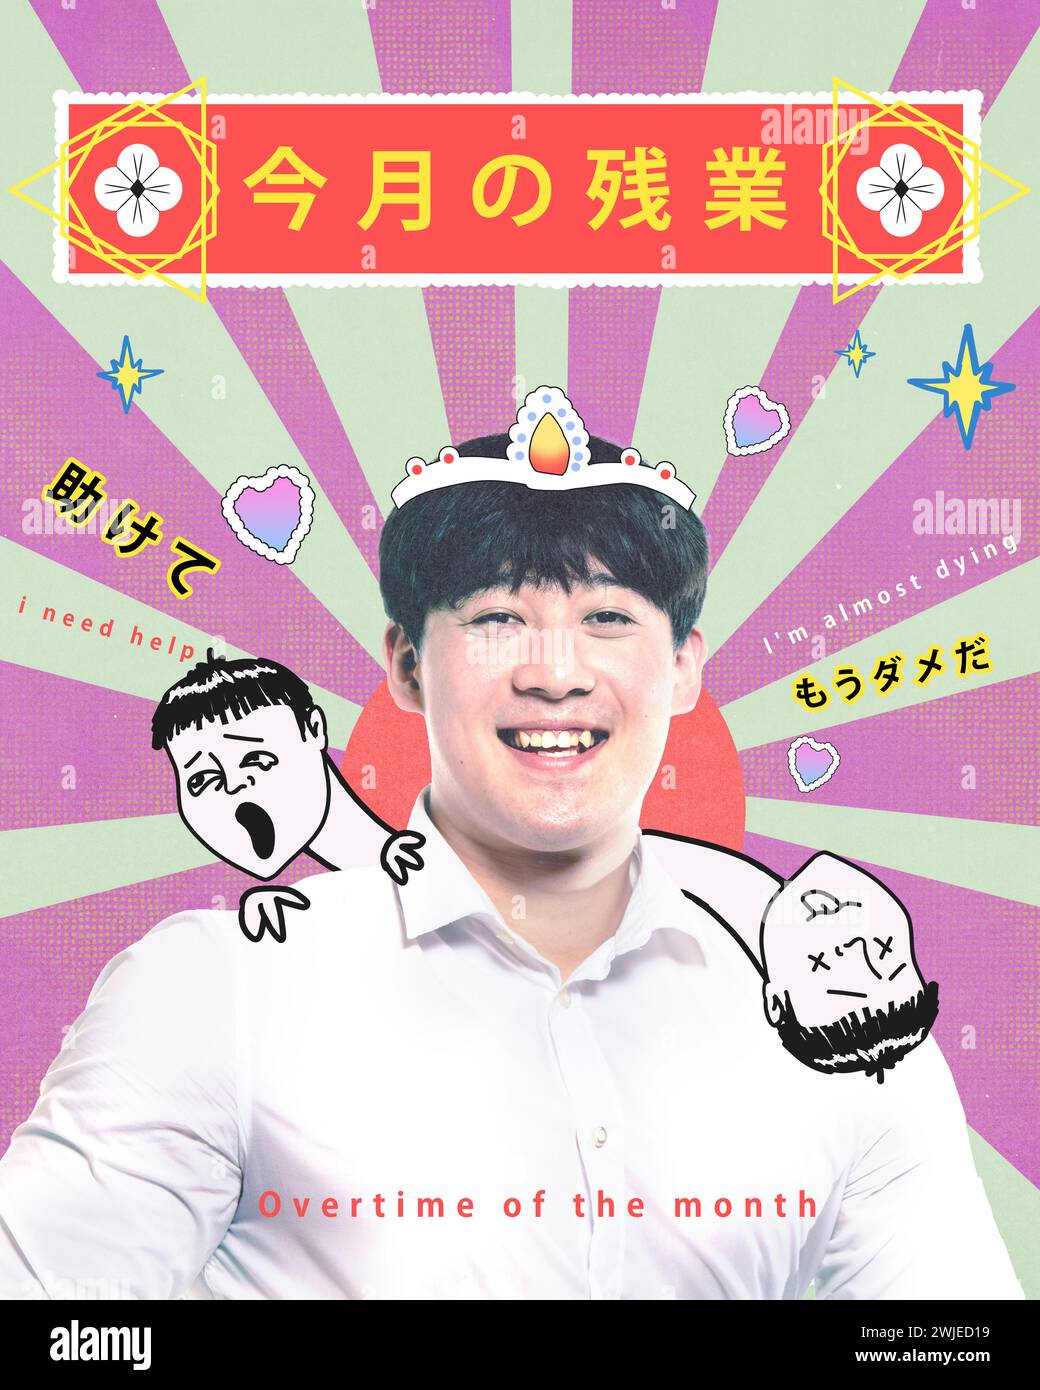 Smiling man with crown illustration and cartoon graphics, Japanese text about work and fatigue. Conceptual design. Overworking and burnout Stock Photo